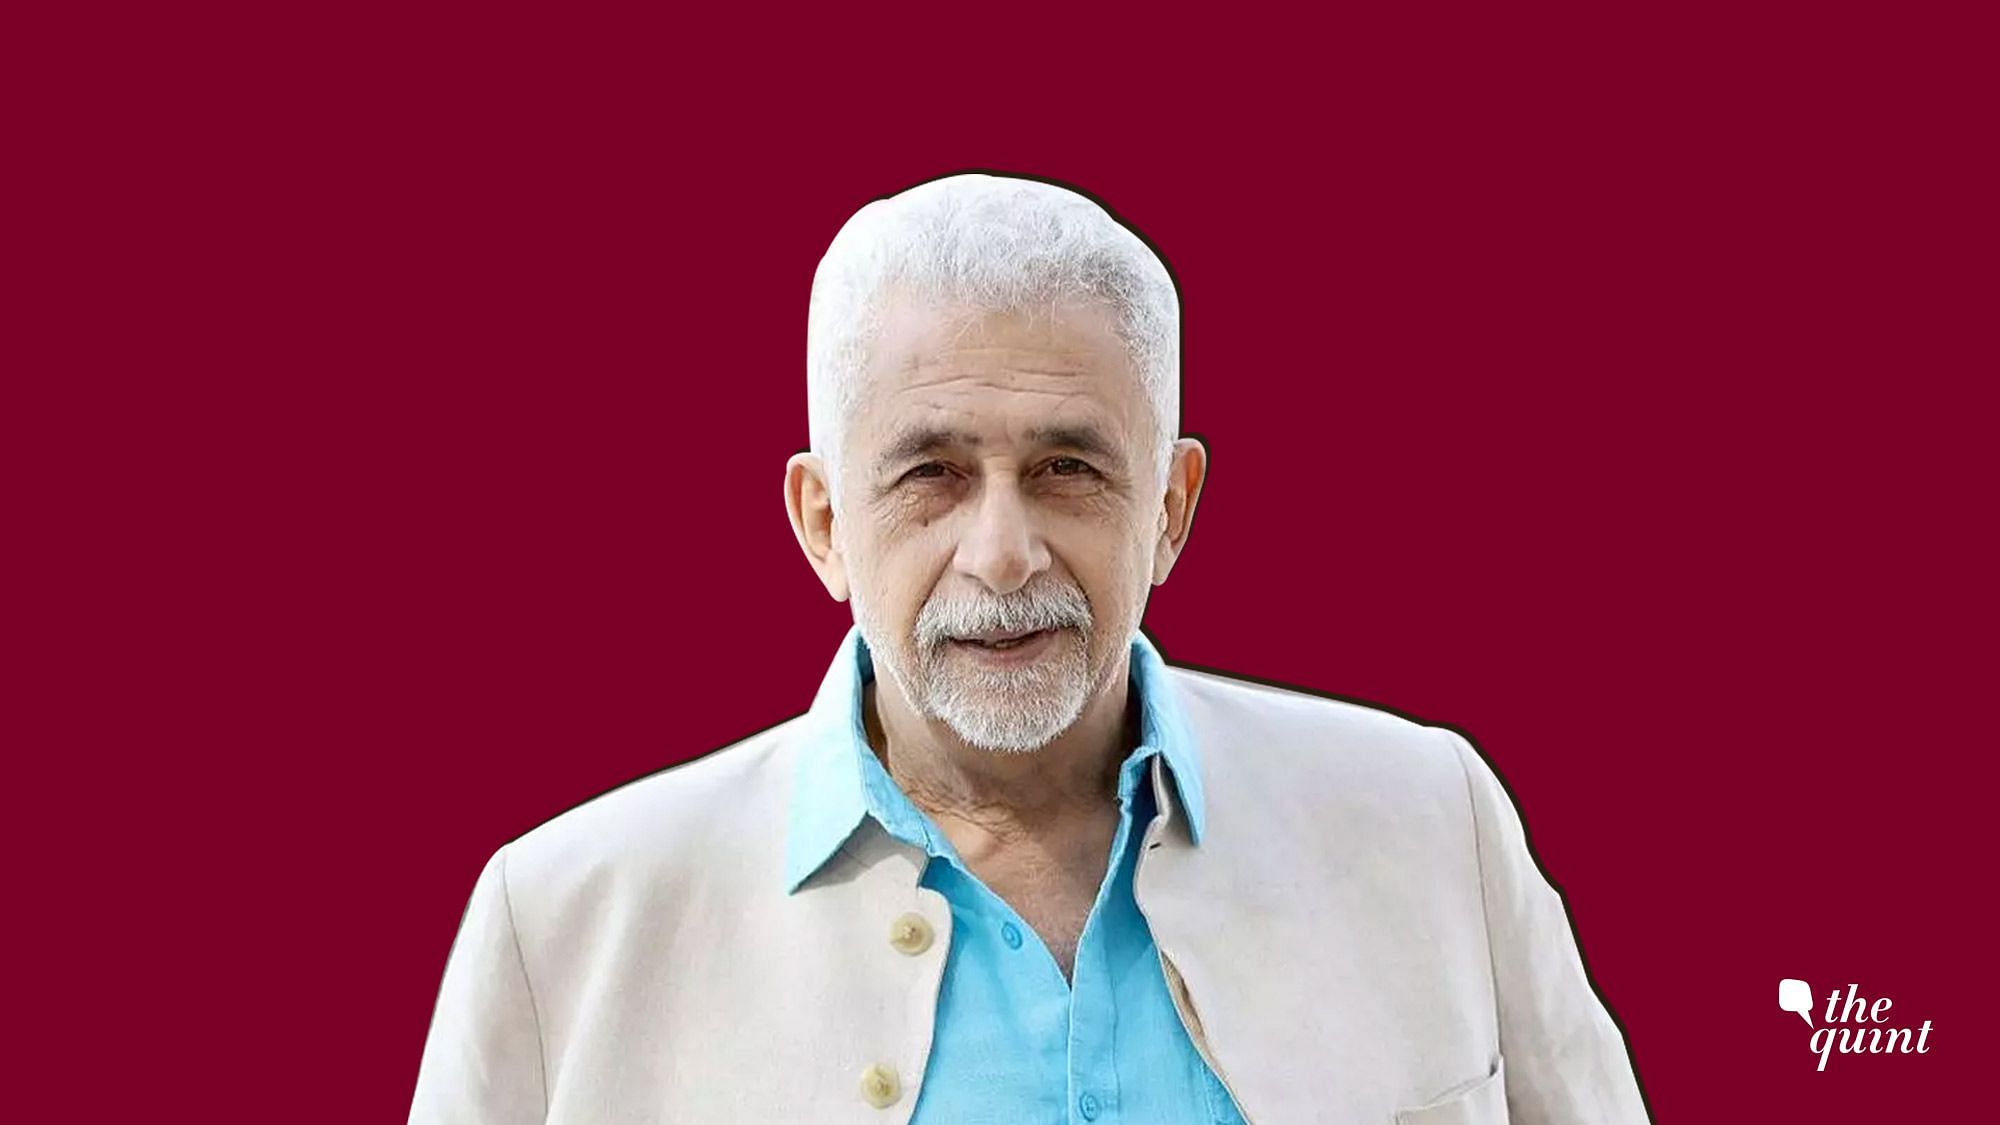 Naseeruddin Shah, while speaking regarding the Bulandshahr violence, has said: “I fear for my children in India.”